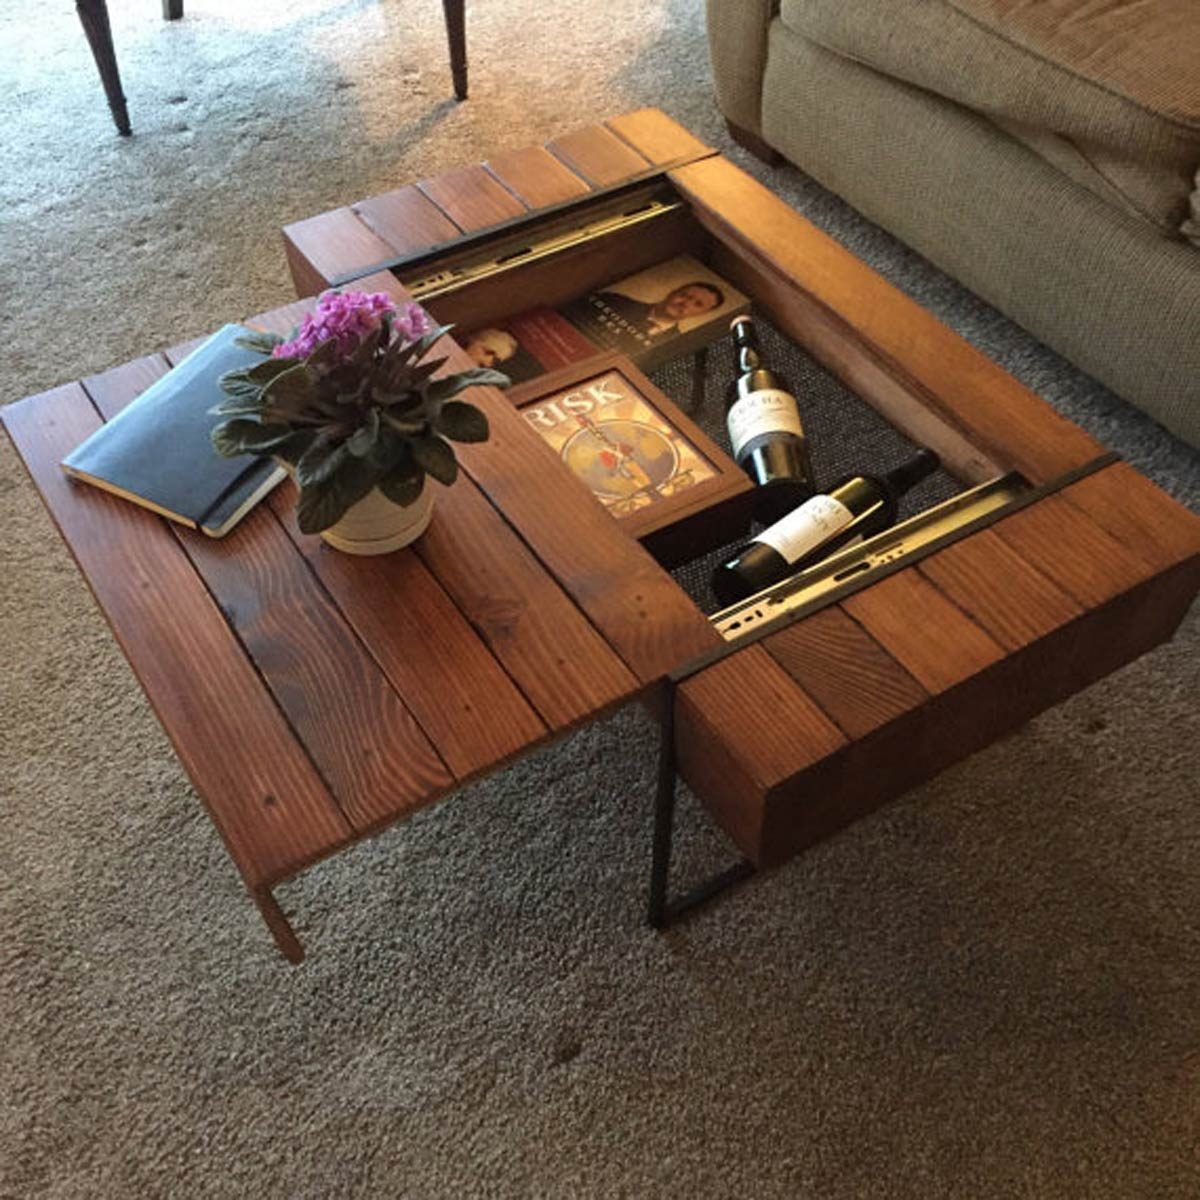 12 Pieces Of Furniture With Hidden Compartments | Family Handyman With Coffee Tables With Hidden Compartments (View 3 of 20)